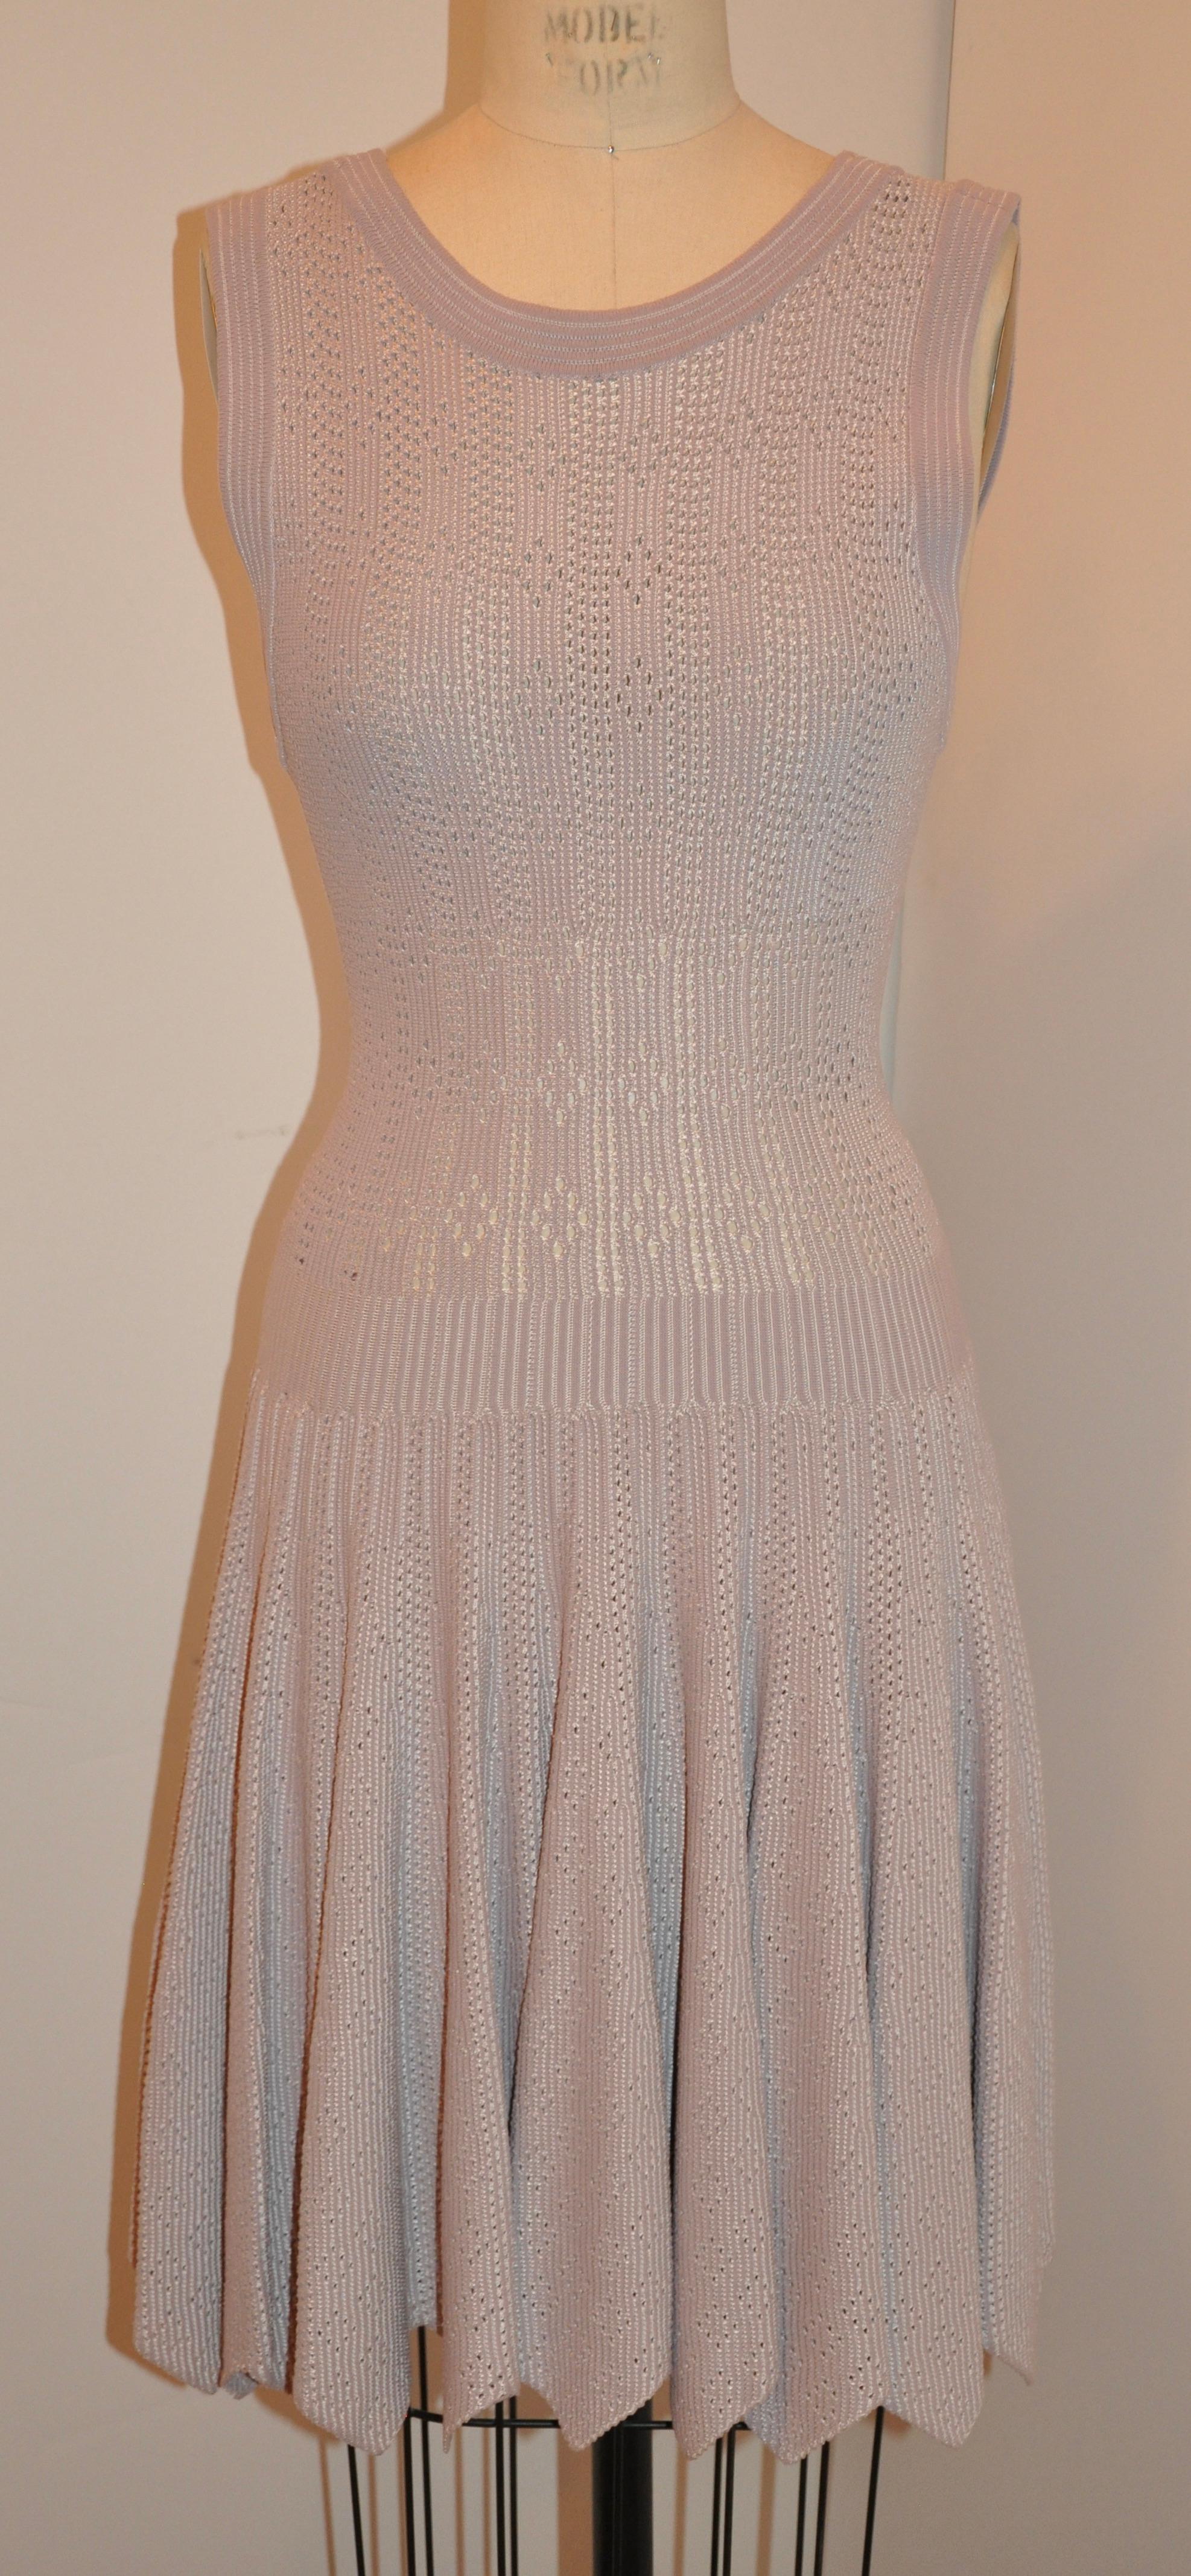 Rare Azzedine Alaia Signature Fawn-Hue Form-Fitting Eyelet Accented Swing Dress For Sale 8